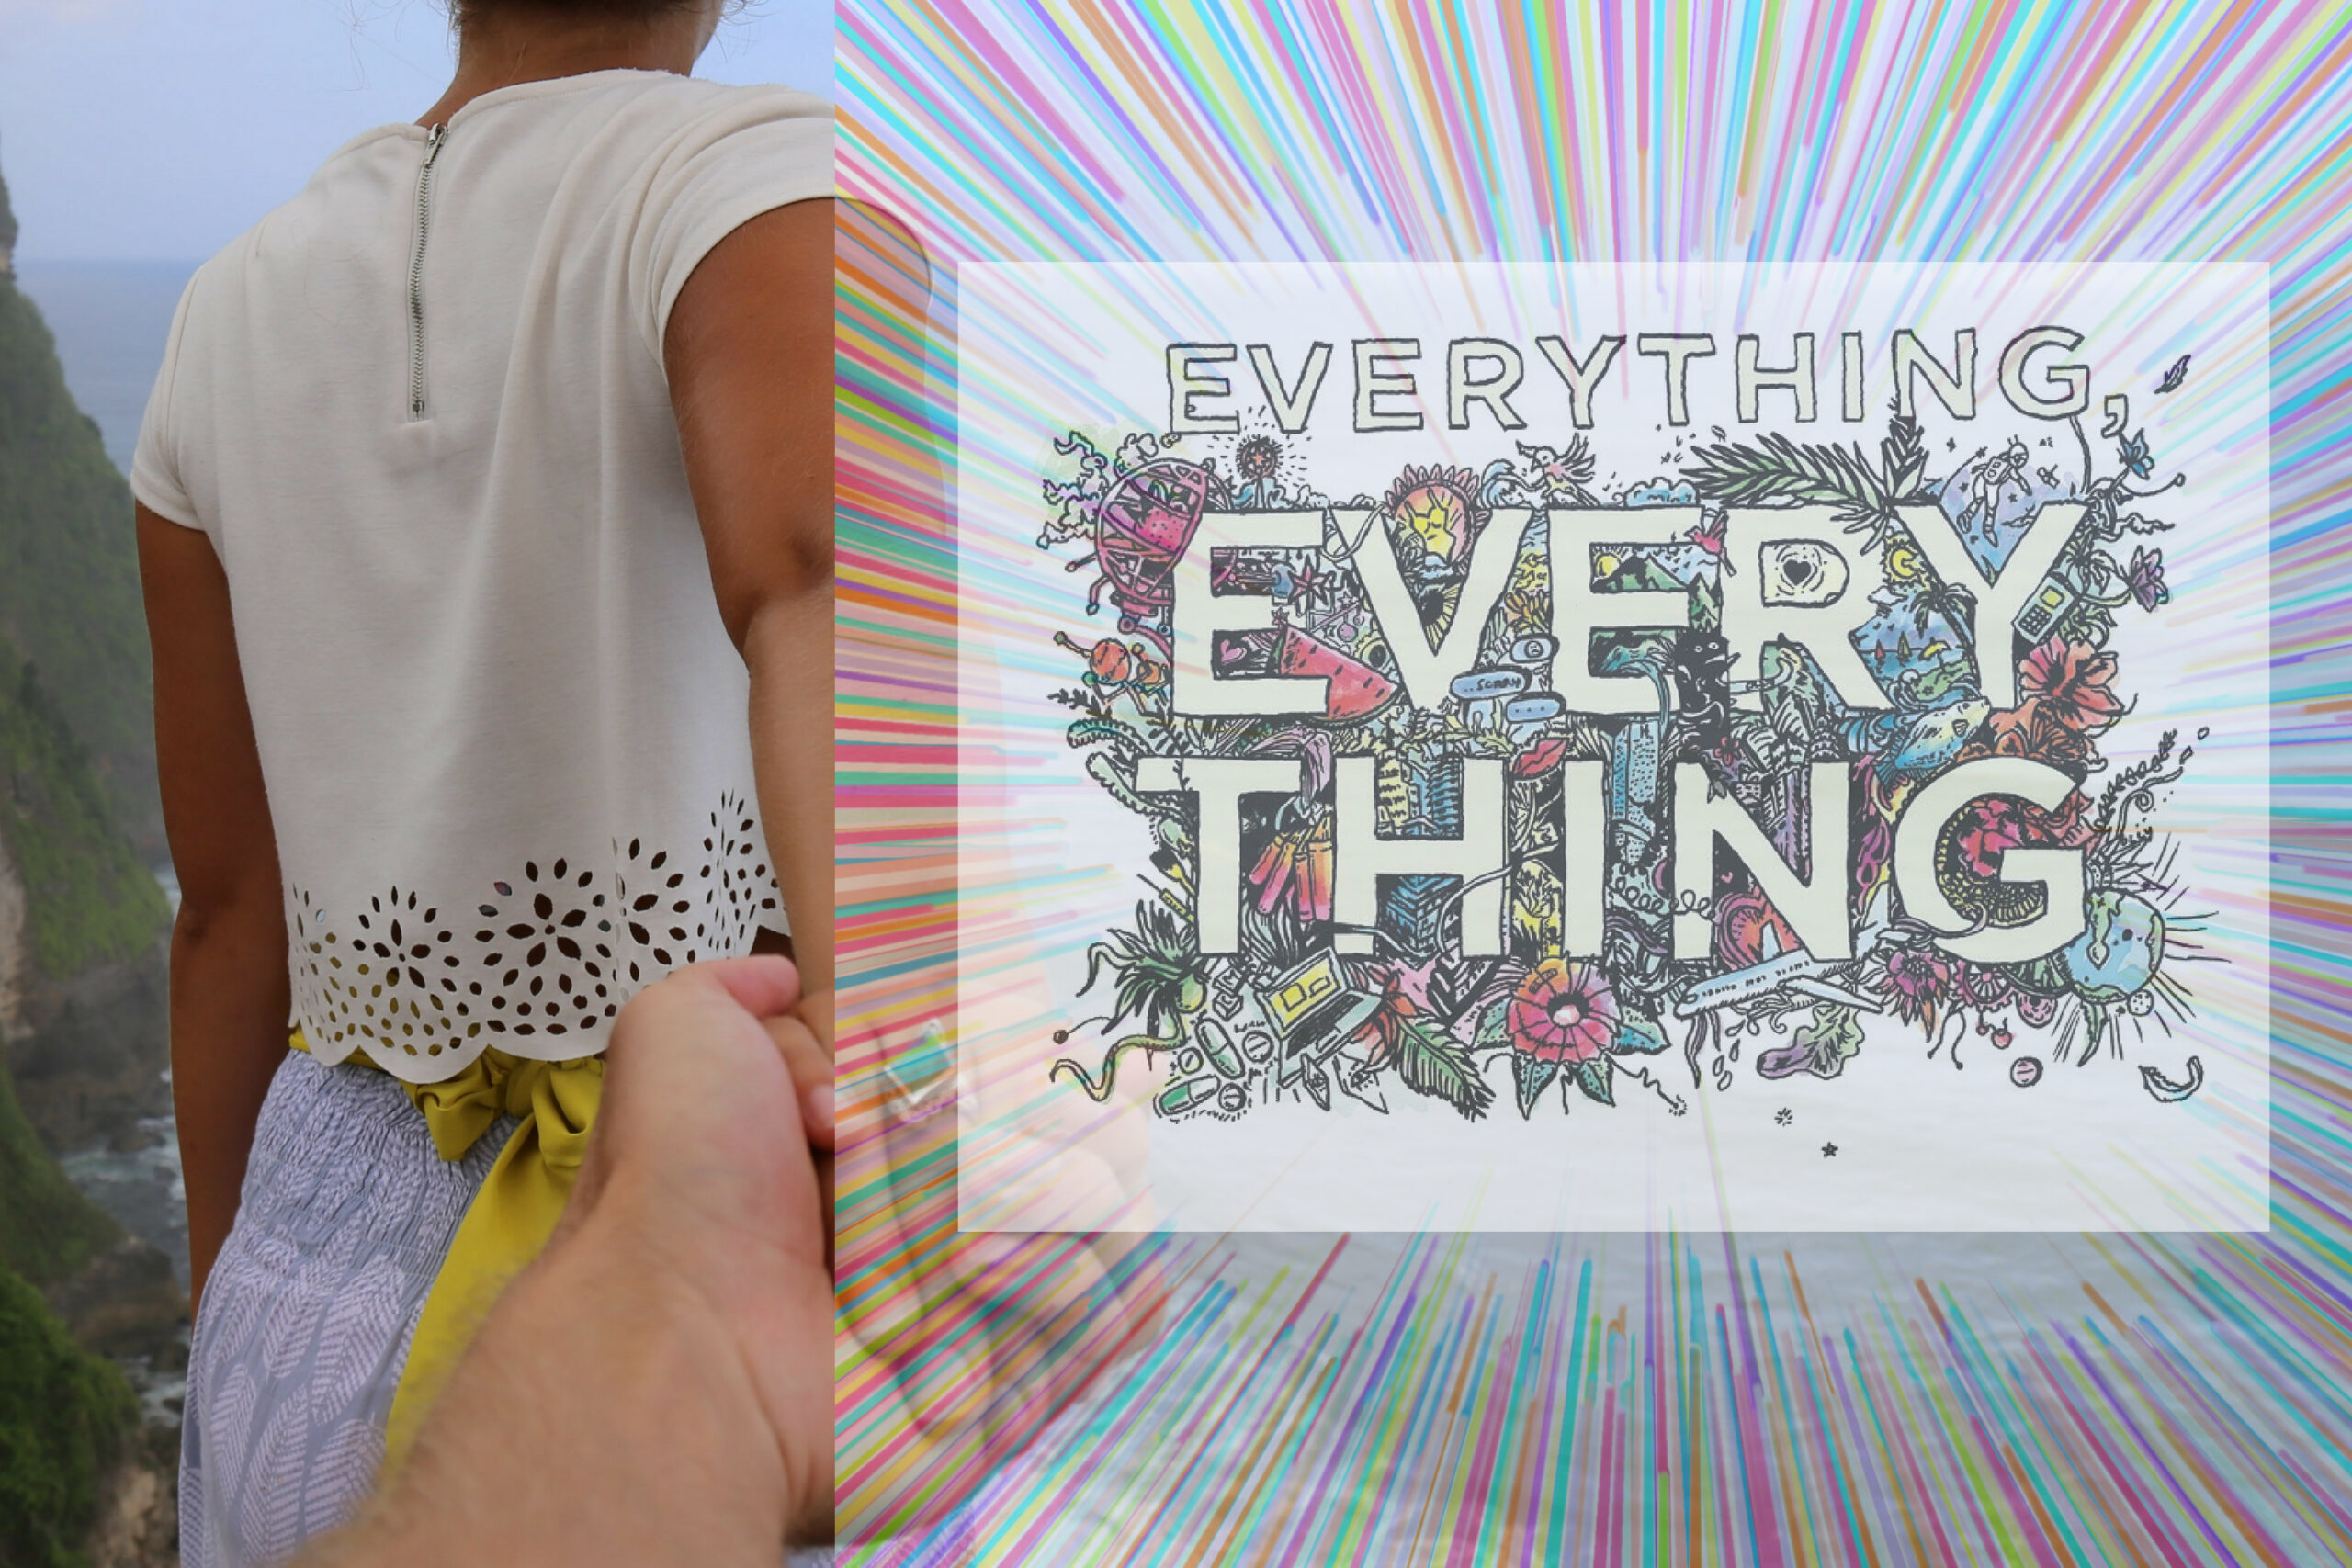 Nicola Yoon’s “Everything, Everything” Is Everything